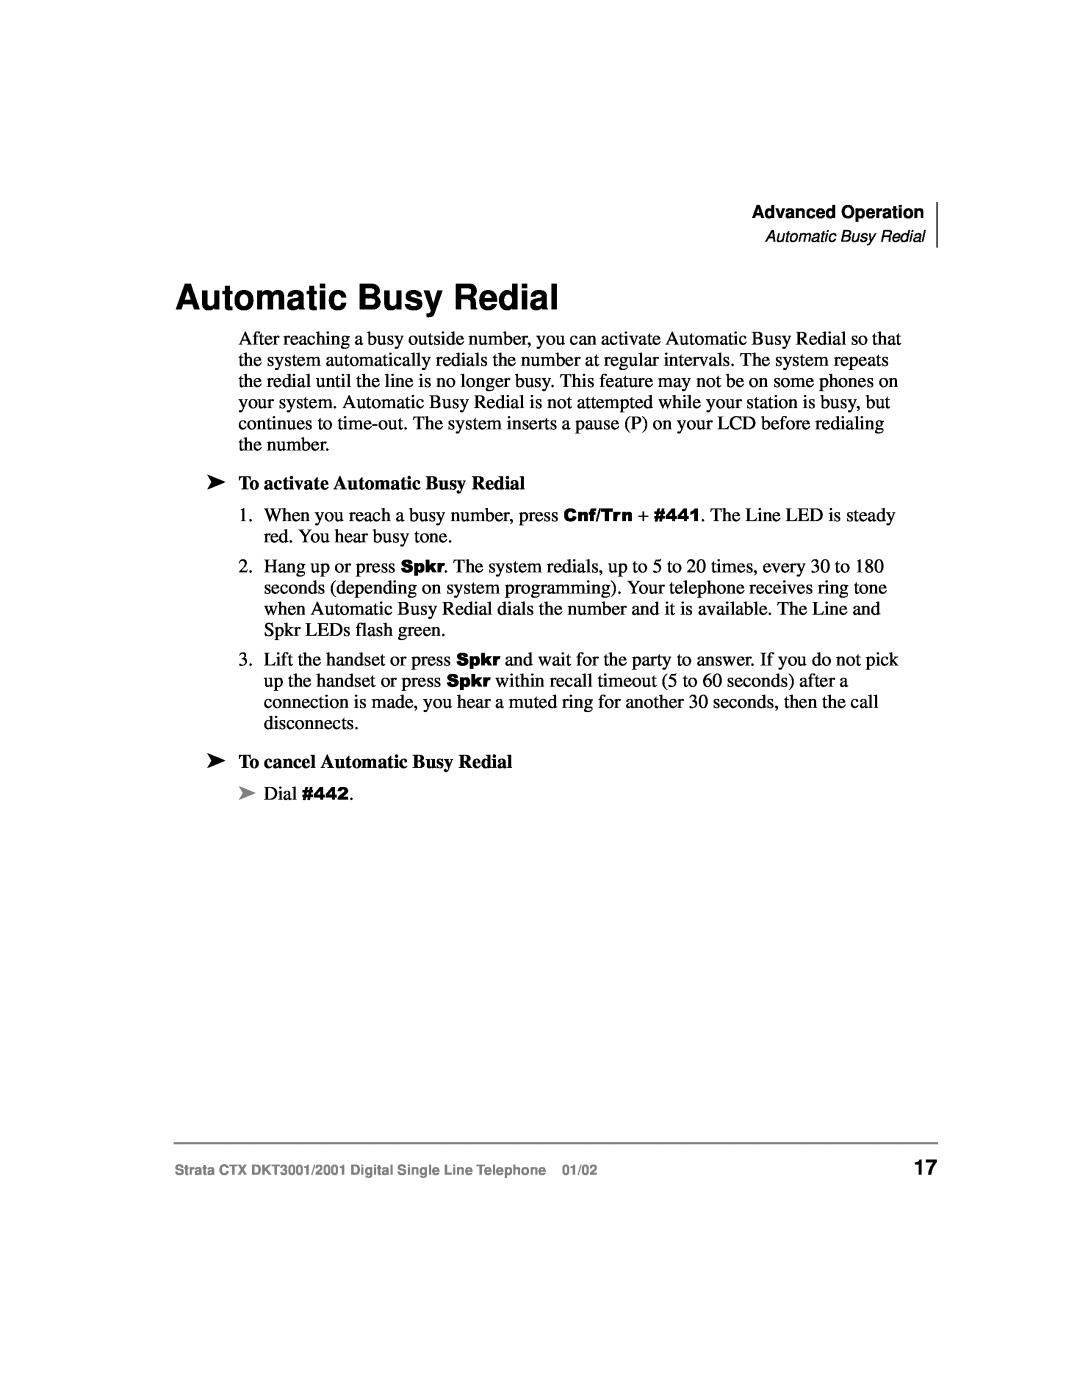 Toshiba 2001, DXT3001 manual To activate Automatic Busy Redial, To cancel Automatic Busy Redial 